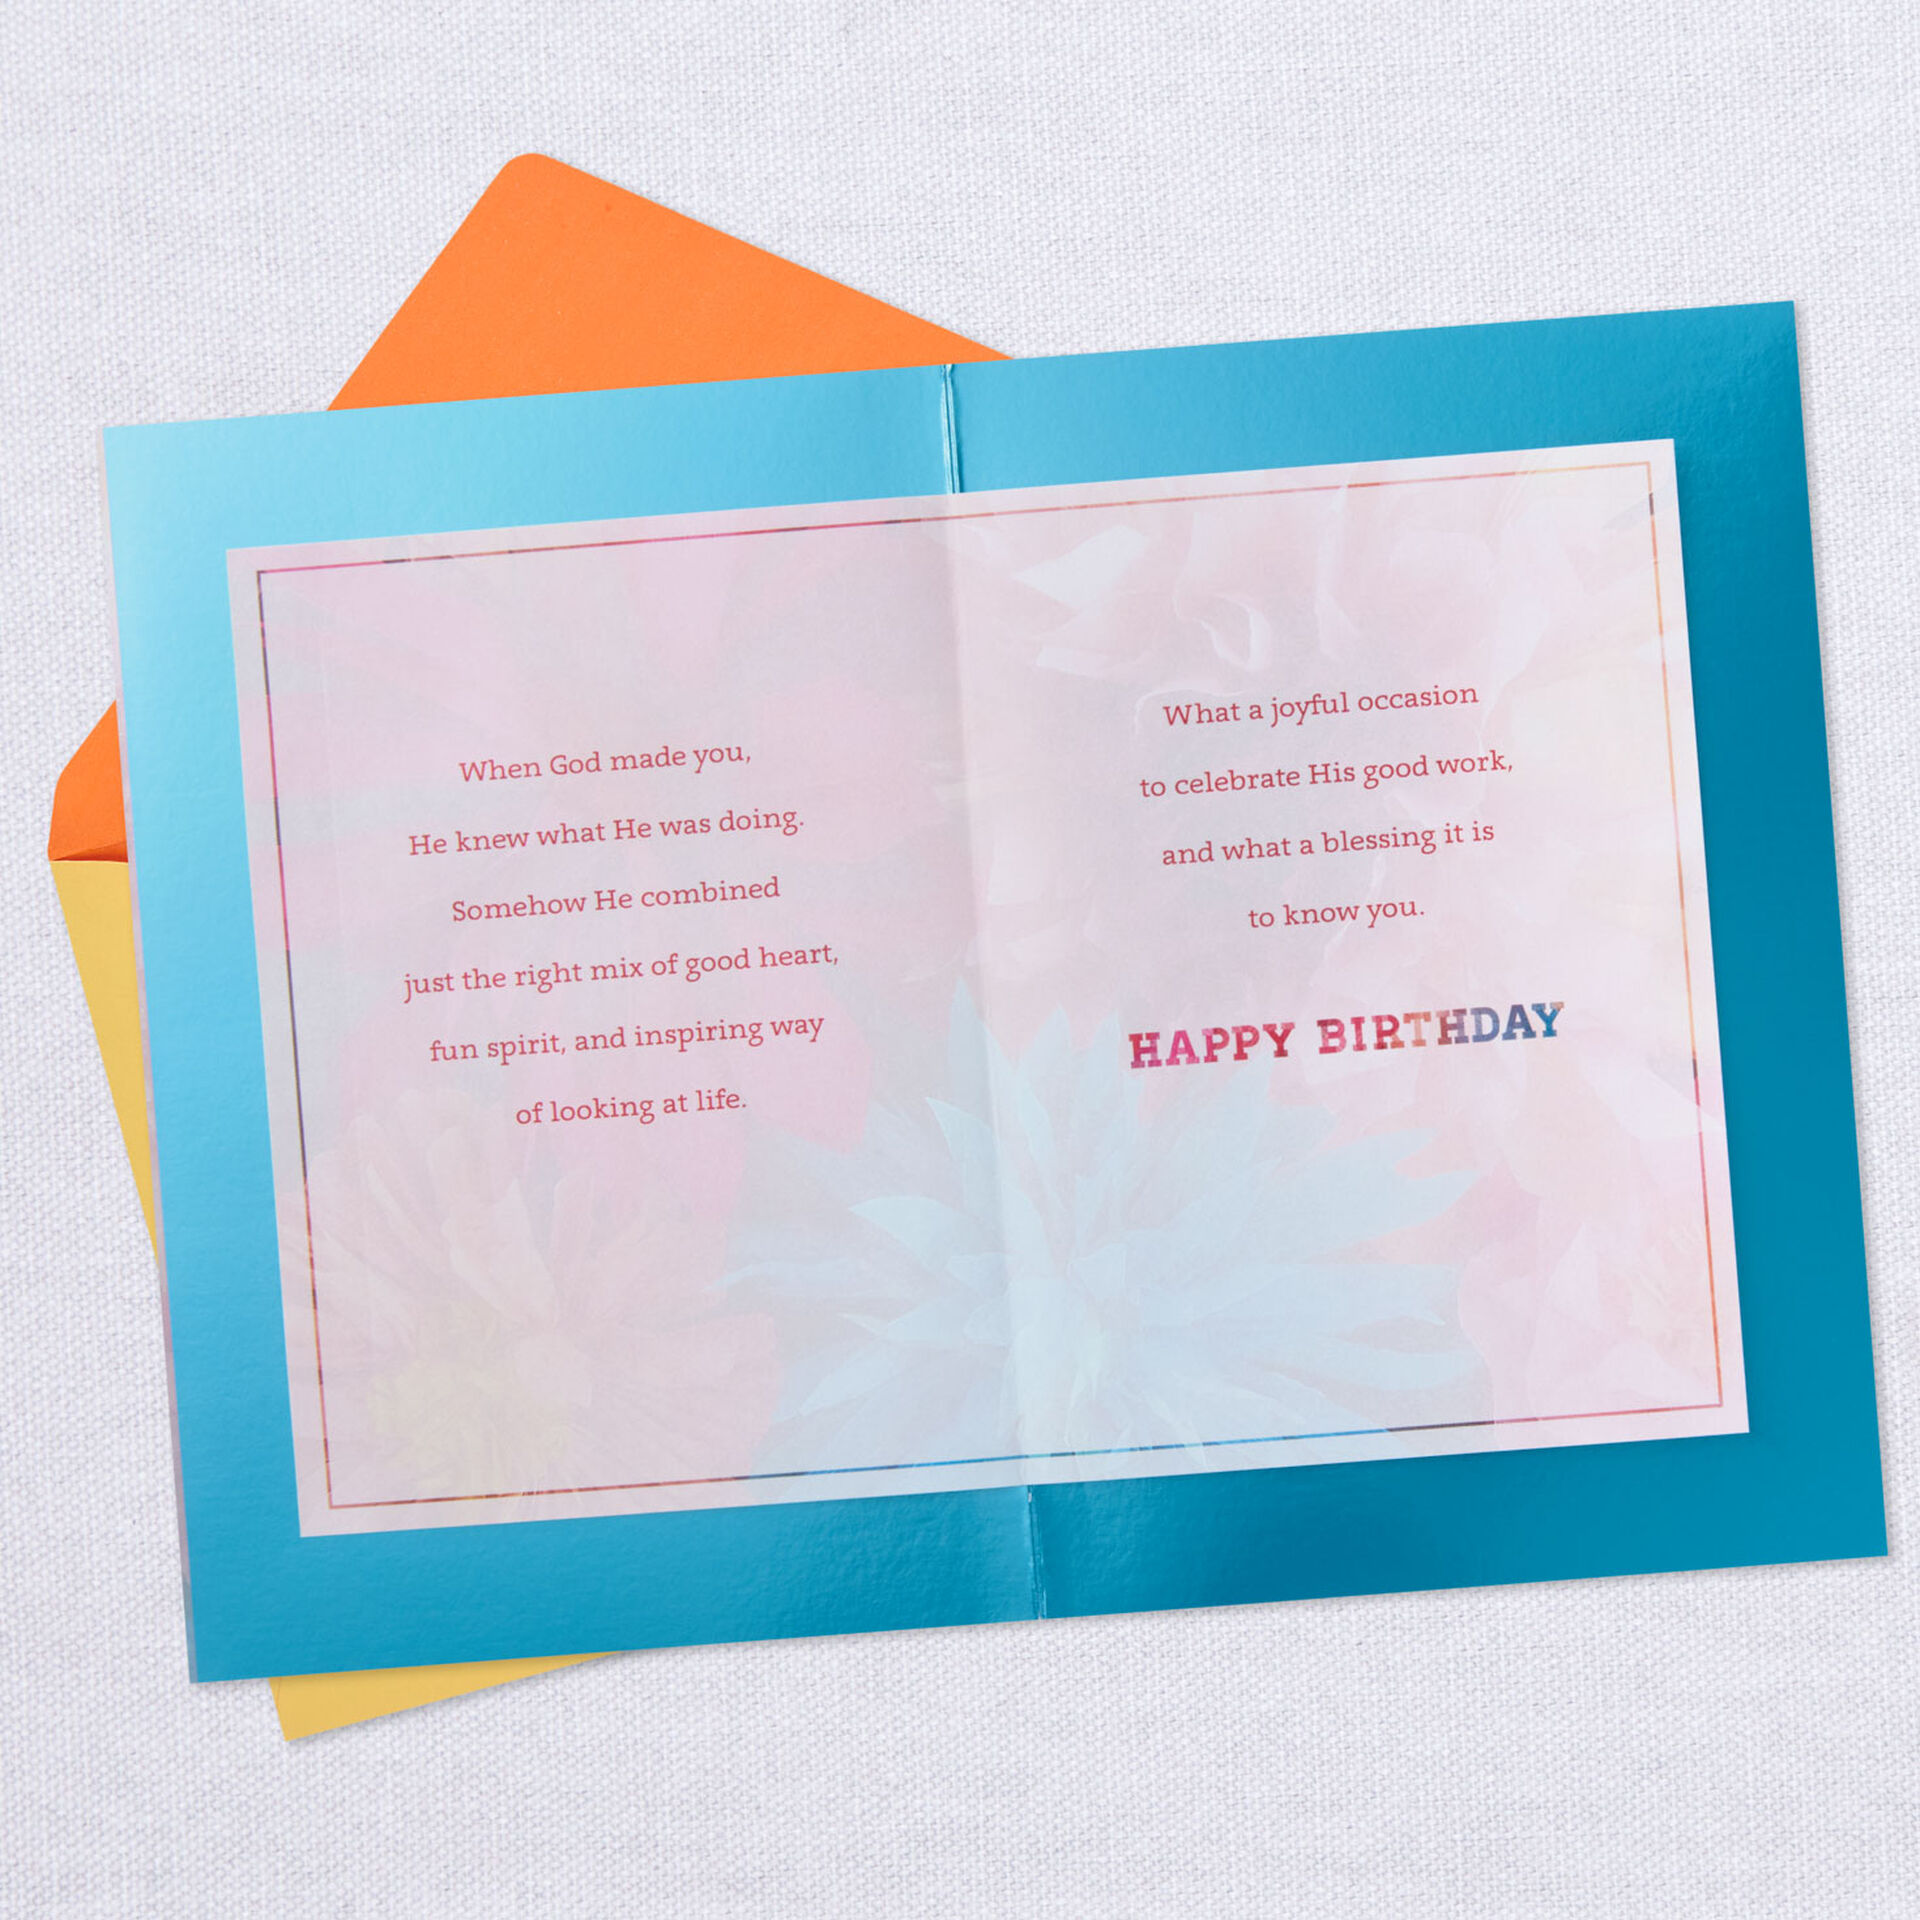 Blessed-to-Know-You-Floral-Religious-Birthday-Card_599MHB1656_03